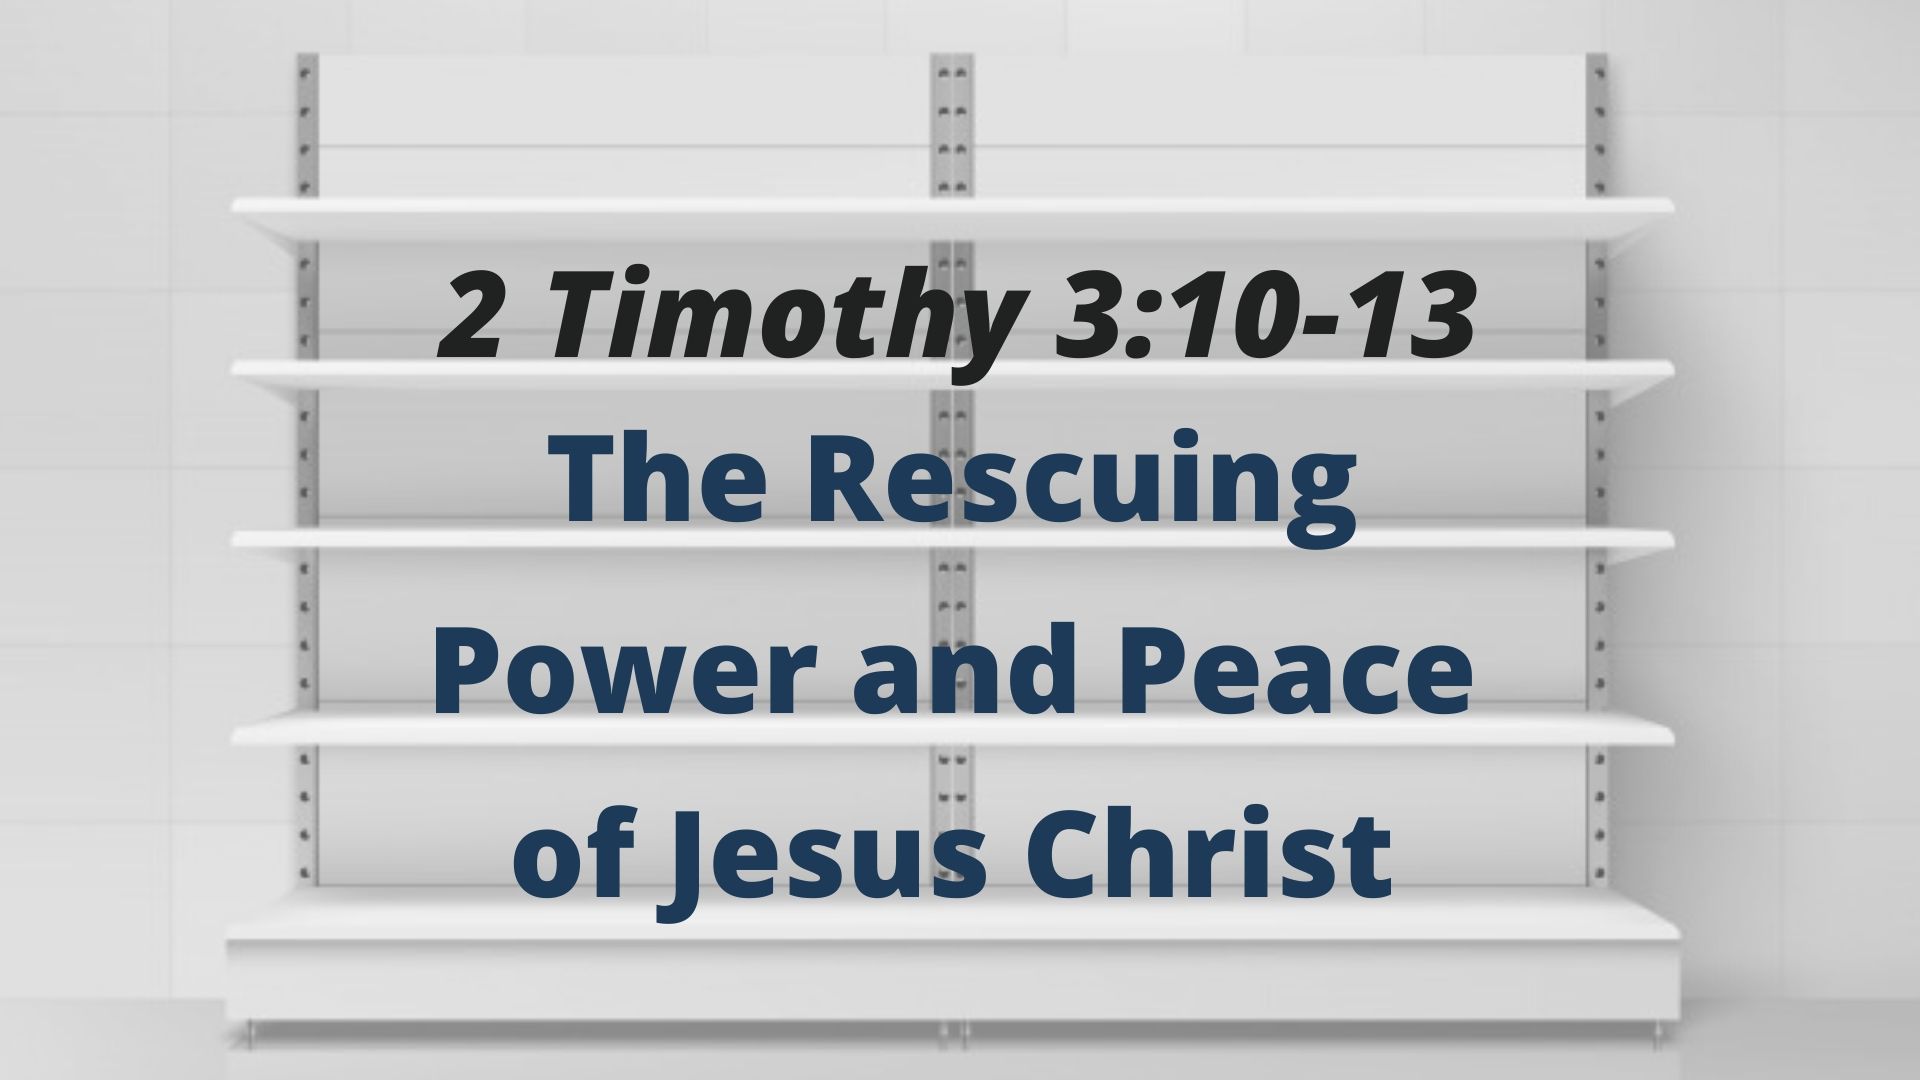 The Rescuing Power and Peace of Jesus Christ (2 Timothy 3:10-13)